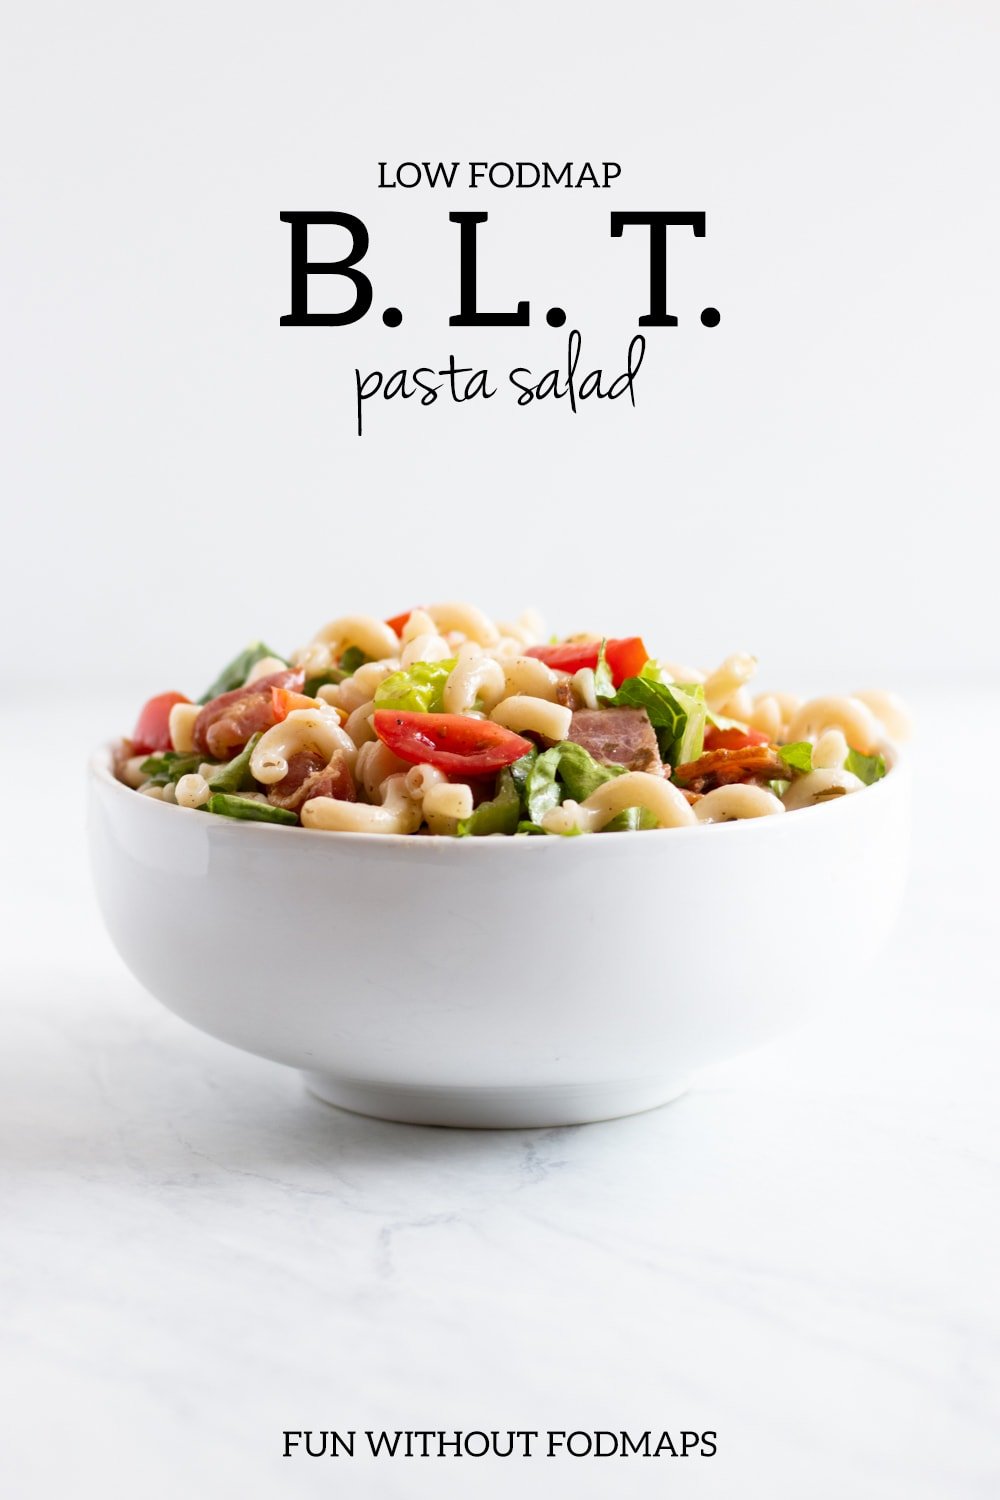 A white bowl filled with a cold pasta and veggie salad sitting on a white marble counter. In the white space above, black text reads "Low FODMAP BLT pasta salad."